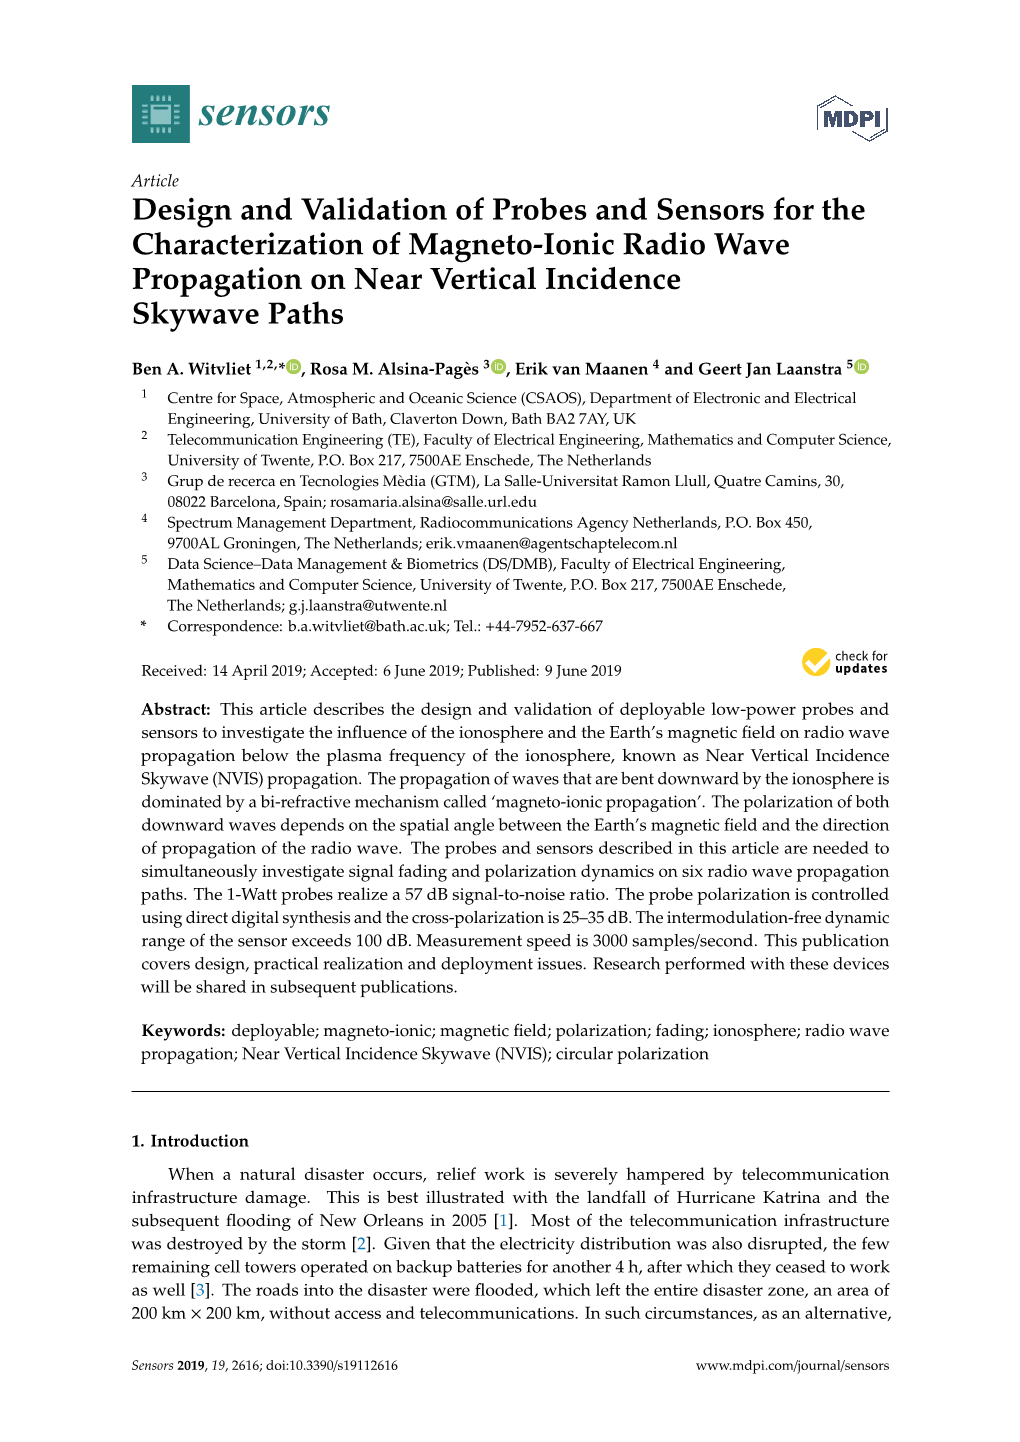 Design and Validation of Probes and Sensors for the Characterization of Magneto-Ionic Radio Wave Propagation on Near Vertical Incidence Skywave Paths